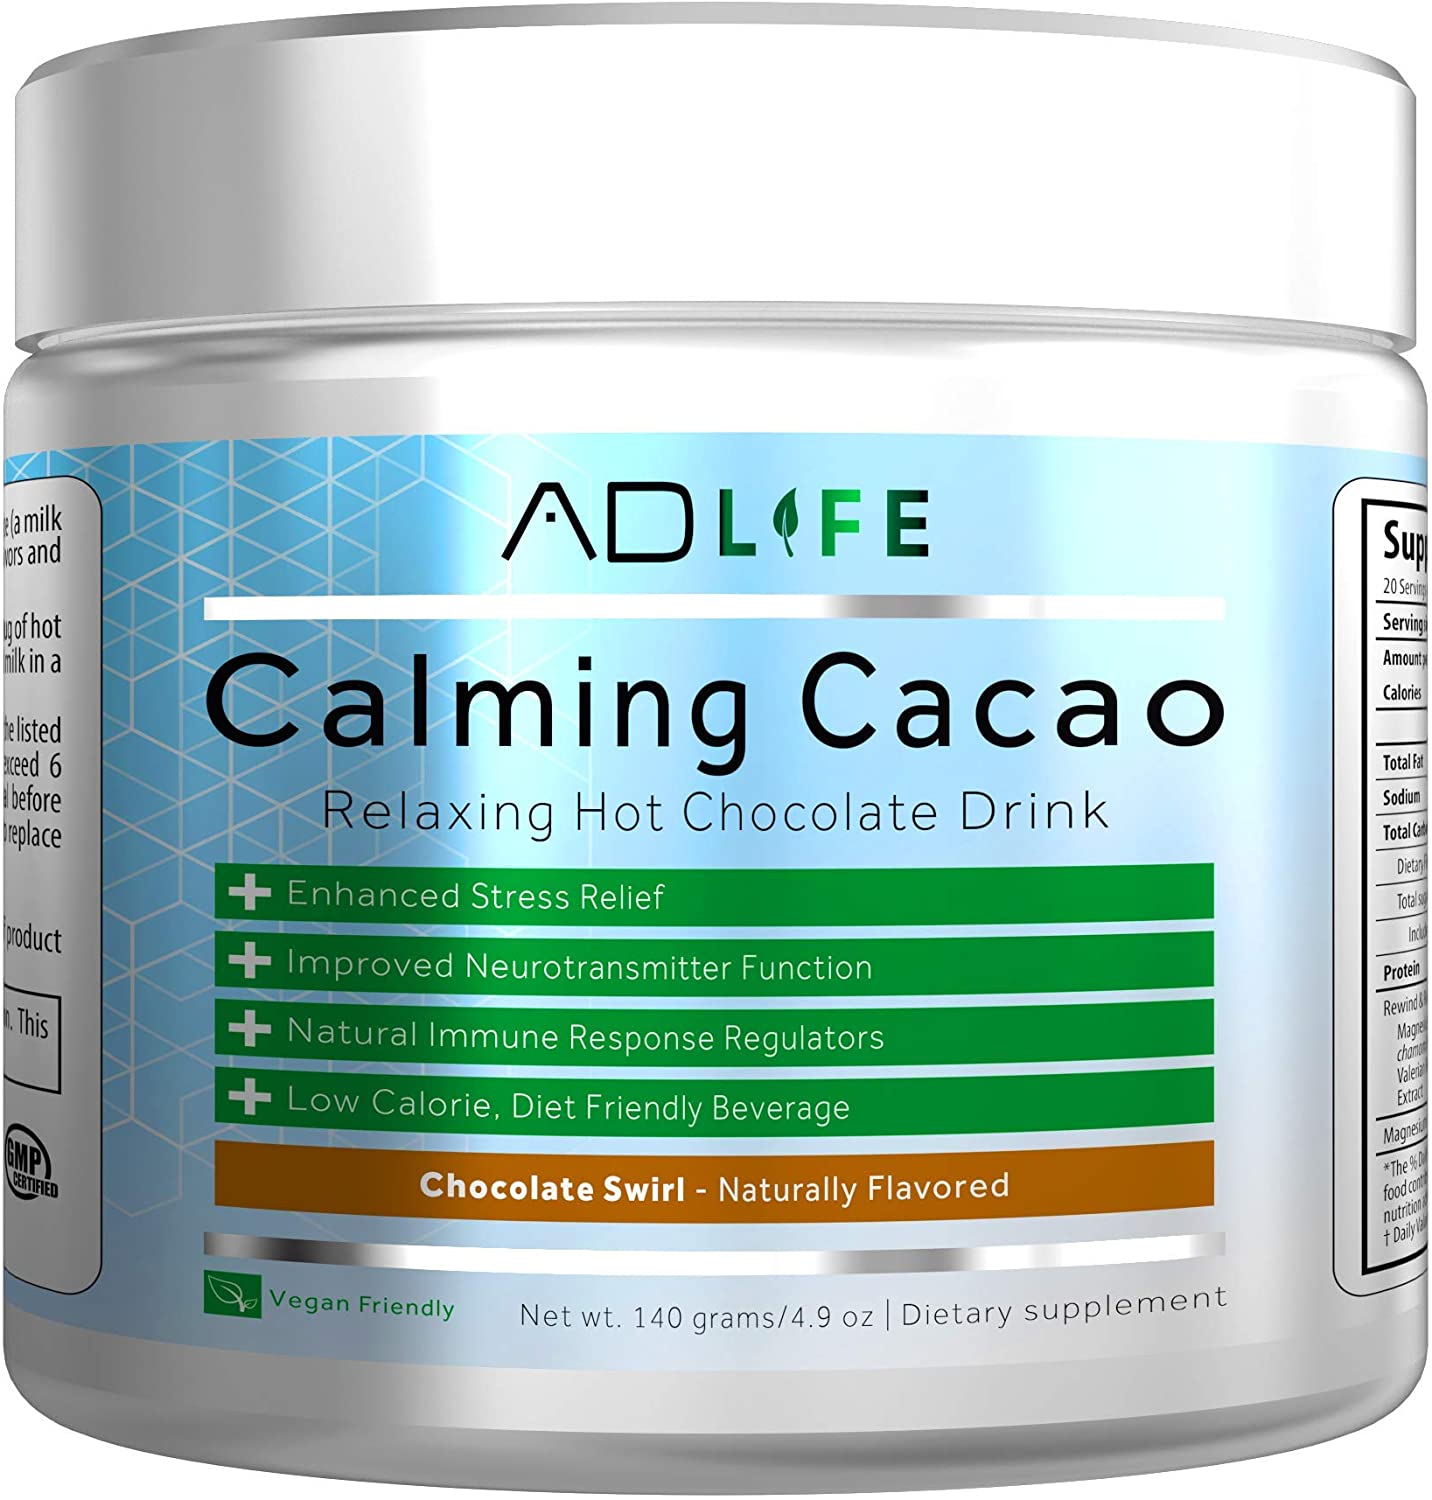 Project AD Calming Cacao Relaxing Hot Chocolate Drink